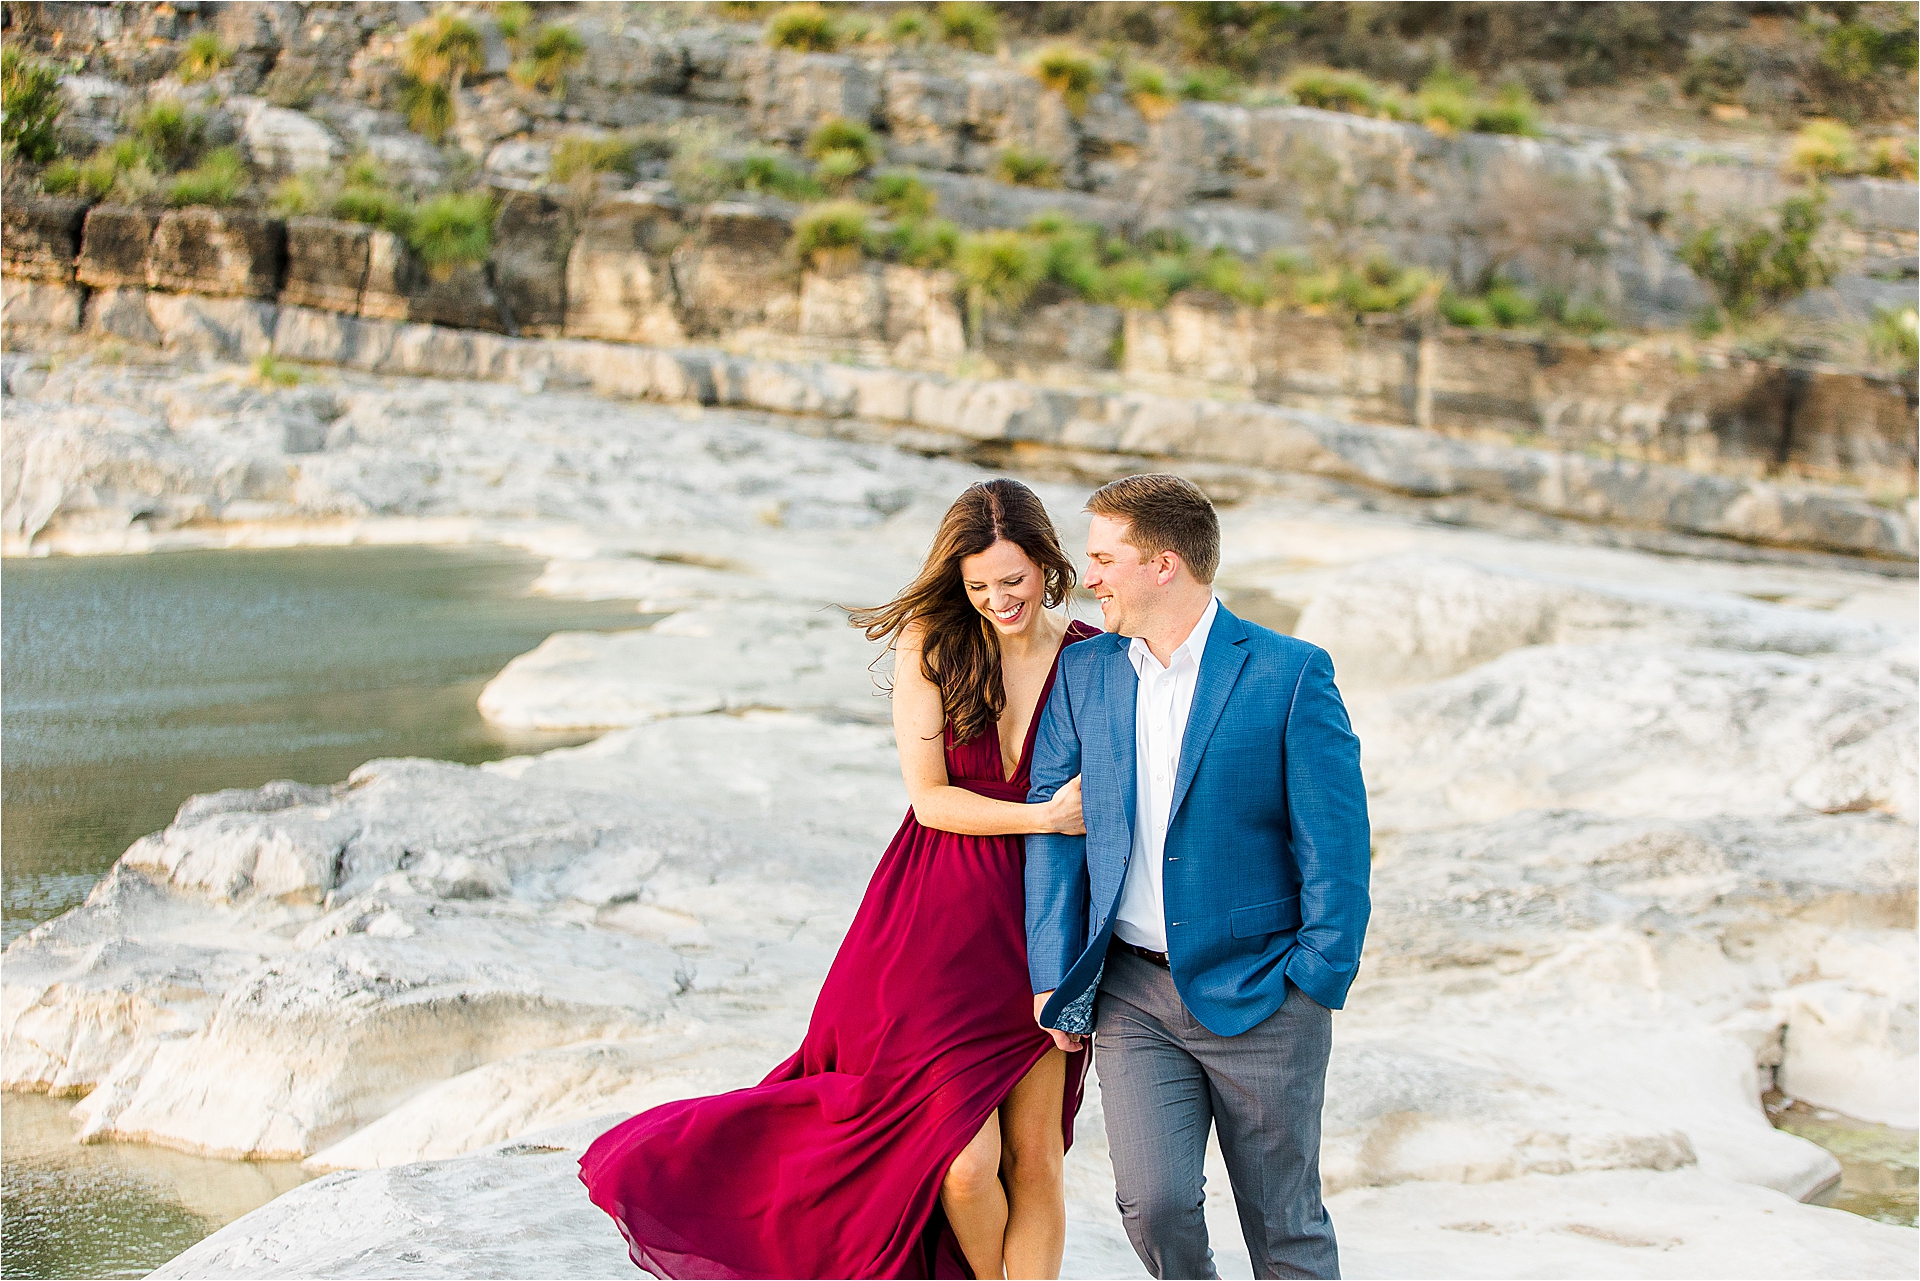 Best Texas Hill Country Engagement Locations | Pedernales Falls State Park near Austin, Texas